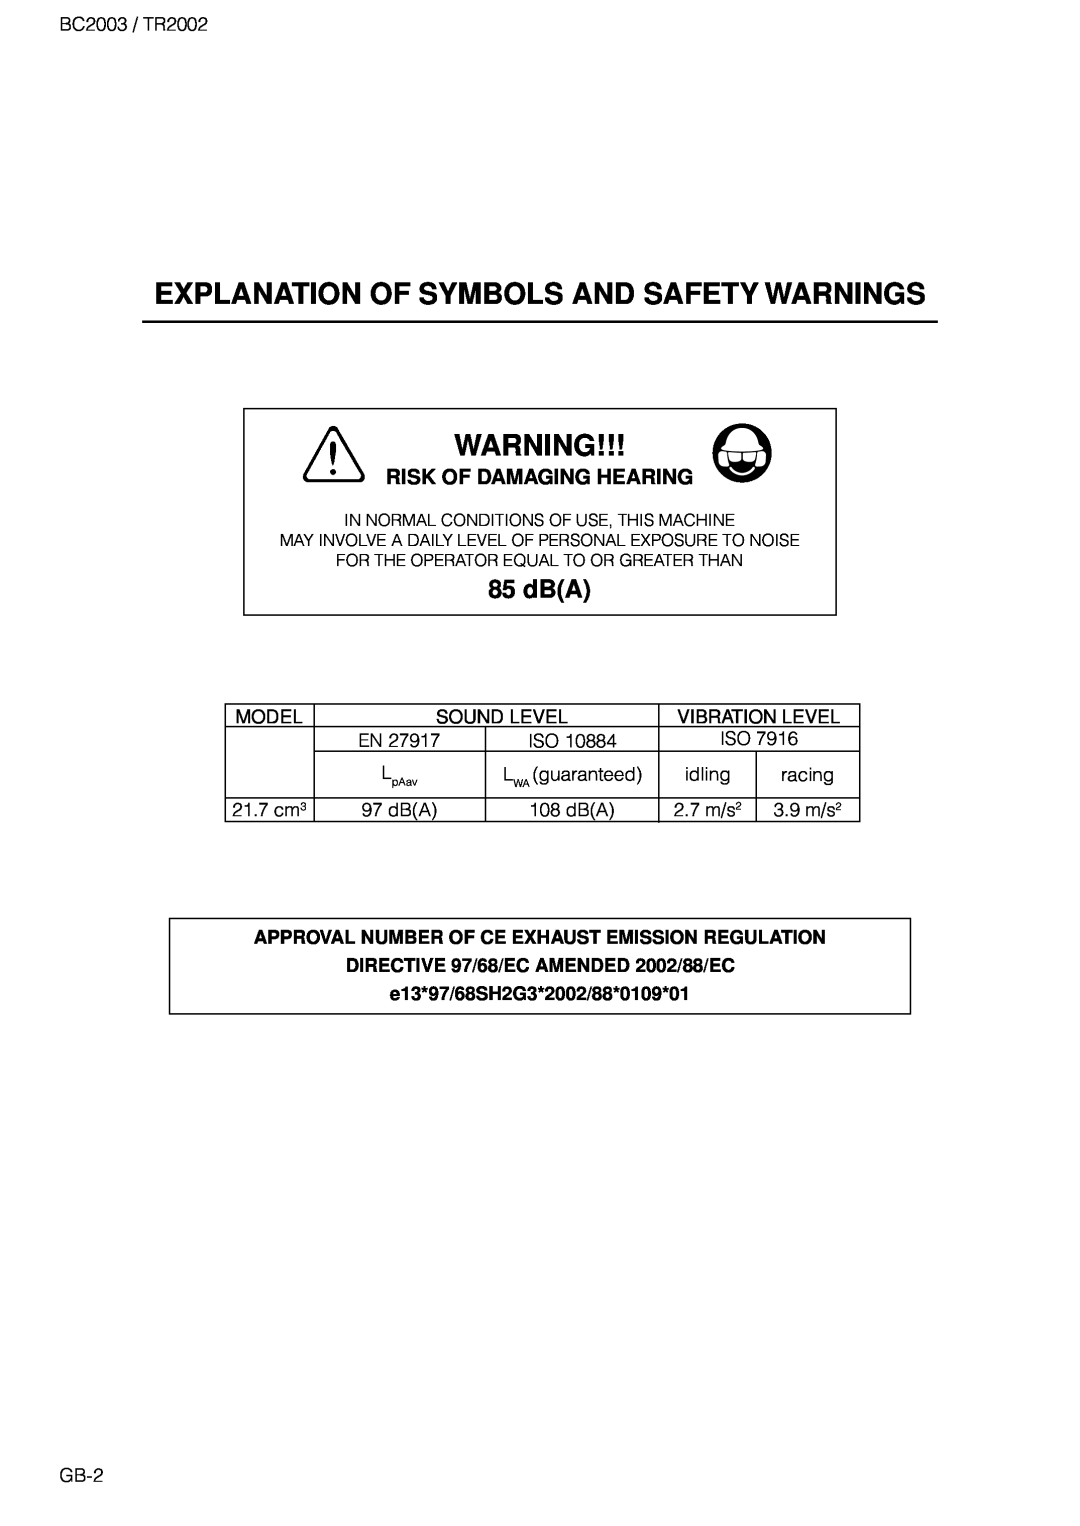 Zenoah TR2002 Approval Number Of Ce Exhaust Emission Regulation, Explanation Of Symbols And Safety Warnings, 85 dBA 